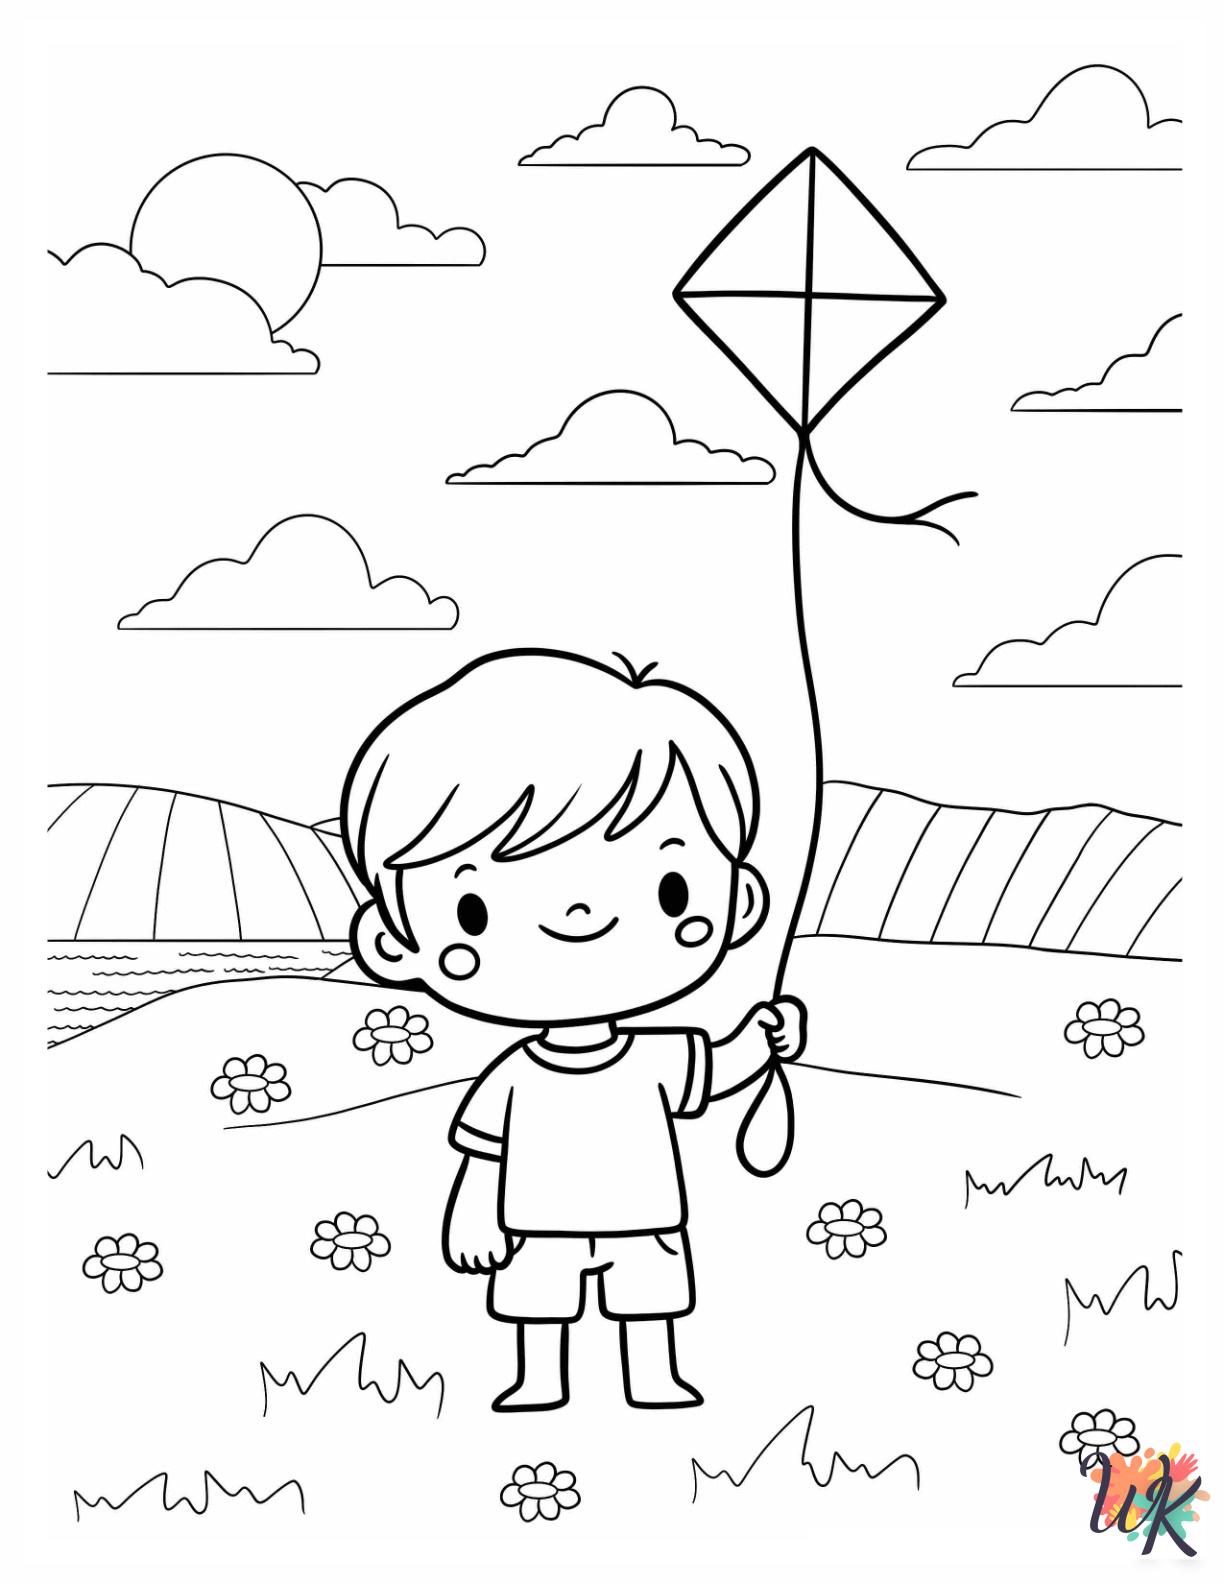 Kite Coloring Pages 5